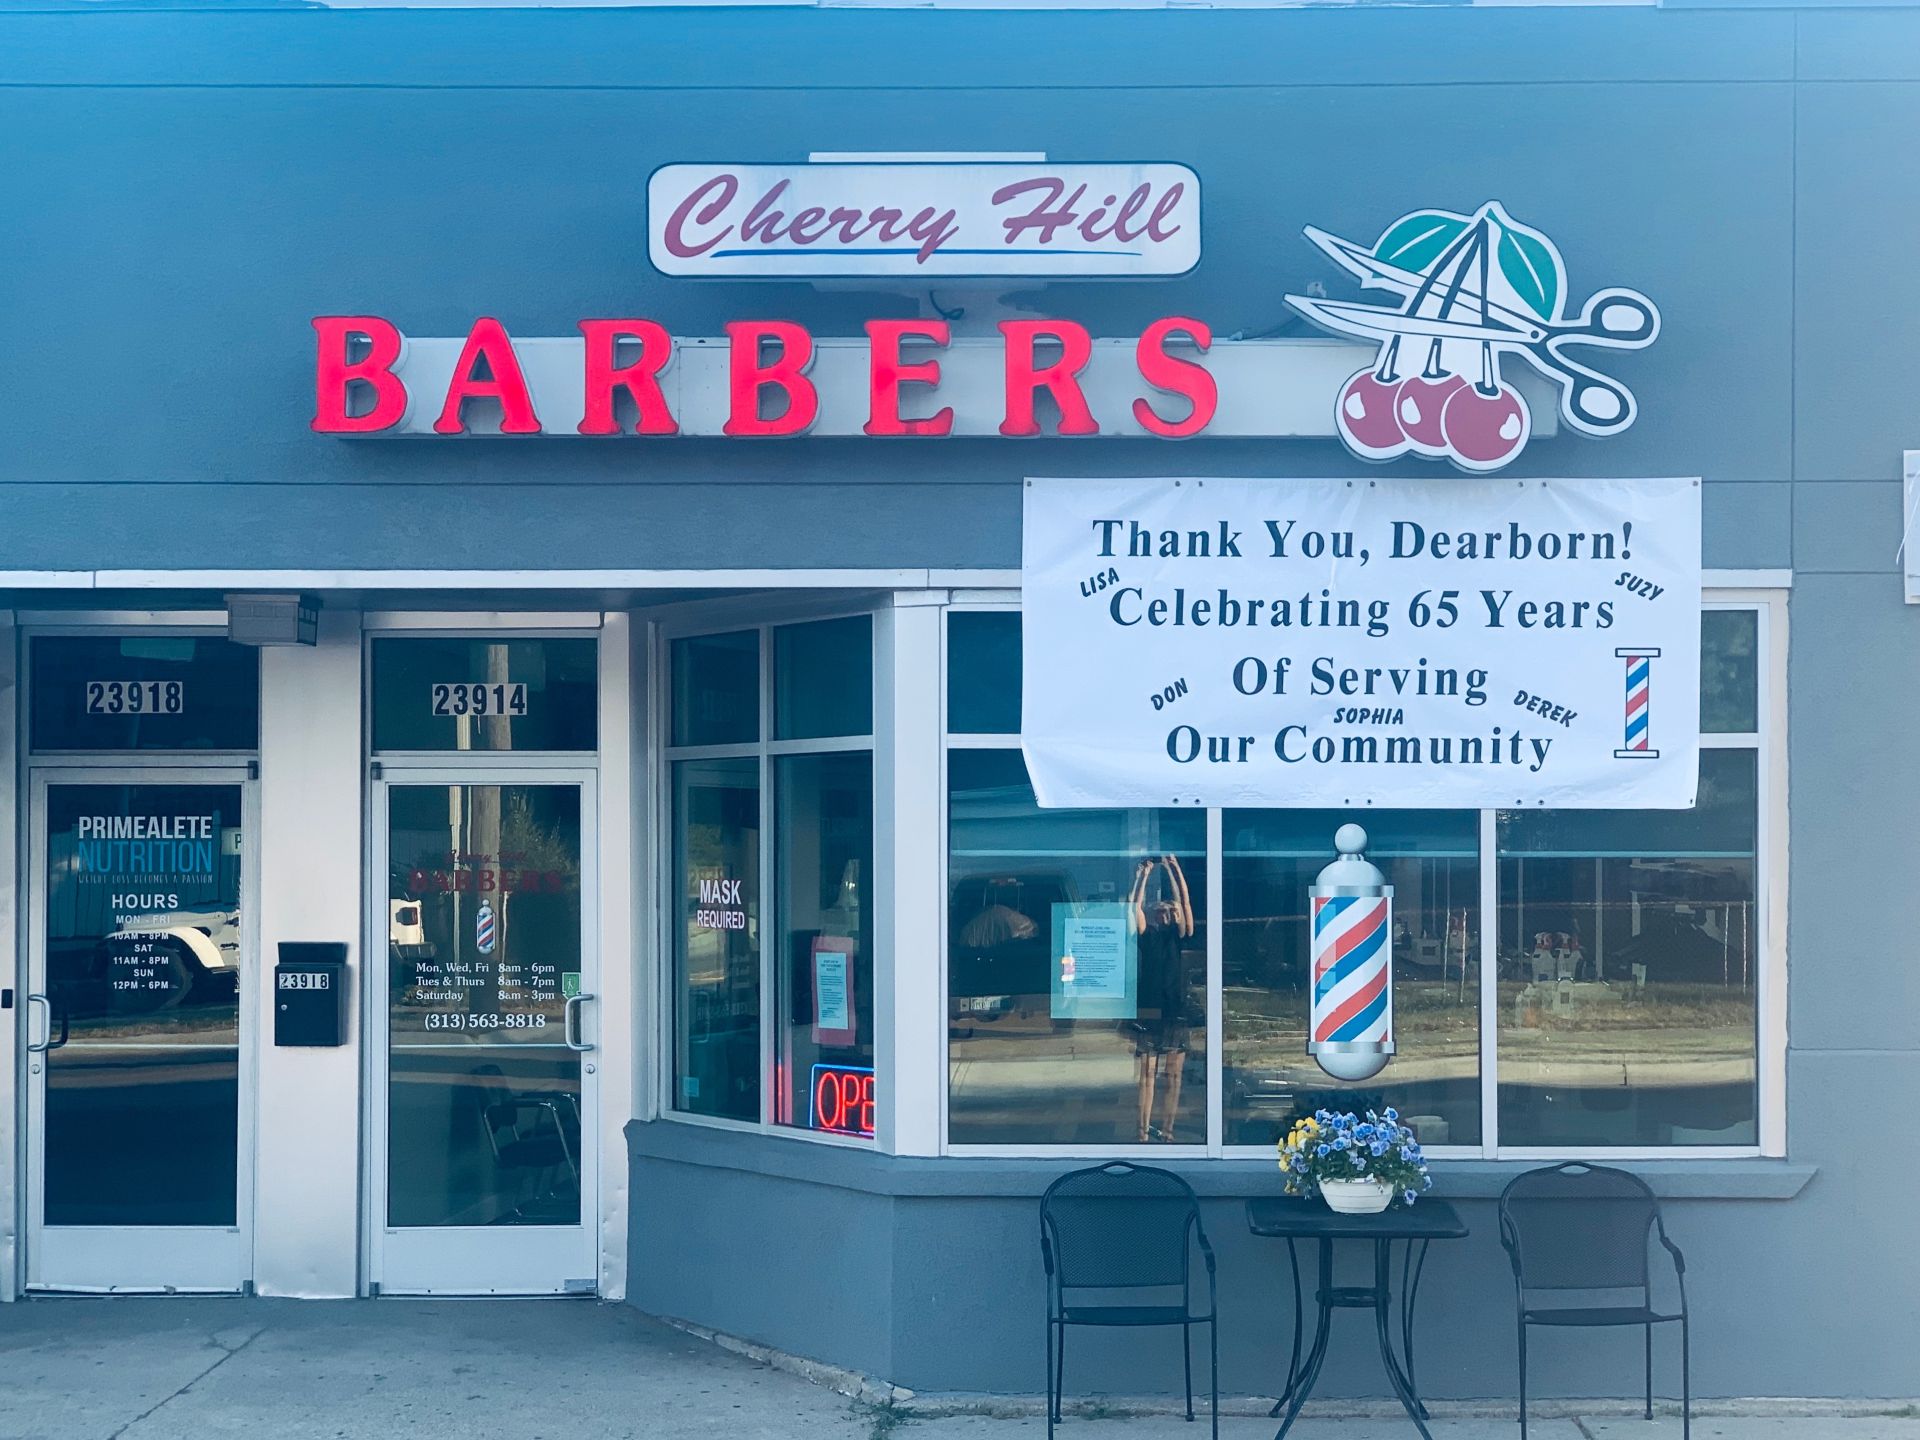 Cherry Hill Barber Shop Main Area with Stylists in Dearborn, Michigan.